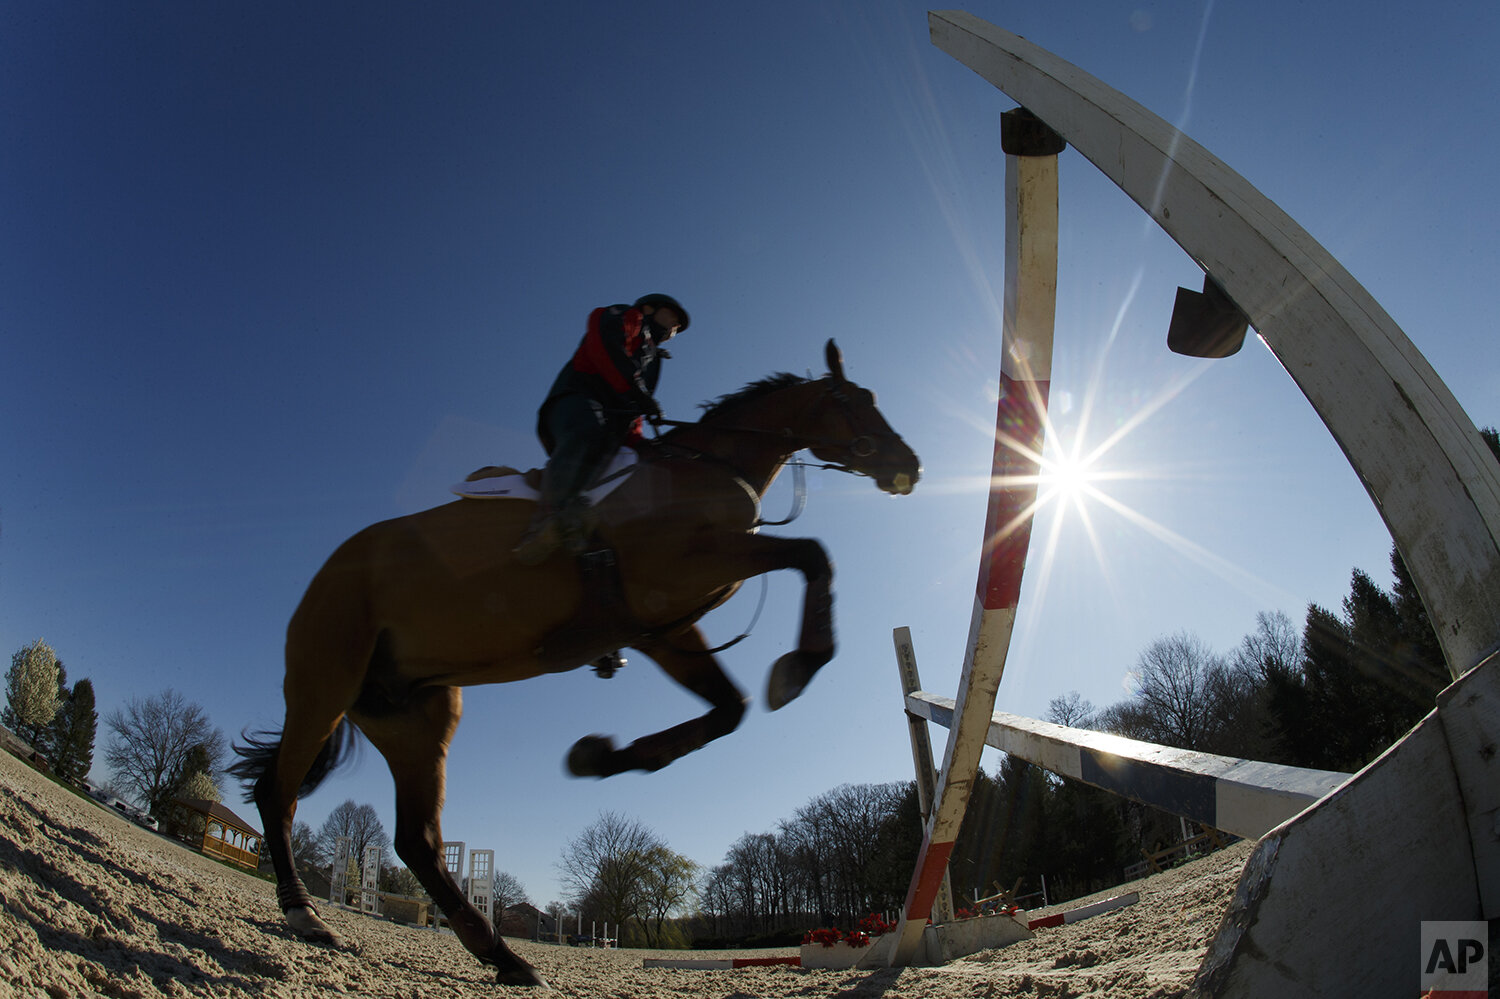  Phillip Dutton, a medal-winning equestrian on the U.S. Olympic team, rides Fernhill Singapore through a series of jumps while training at his farm, Thursday, April 2, 2020, in West Grove, Pa. (AP Photo/Matt Slocum) 